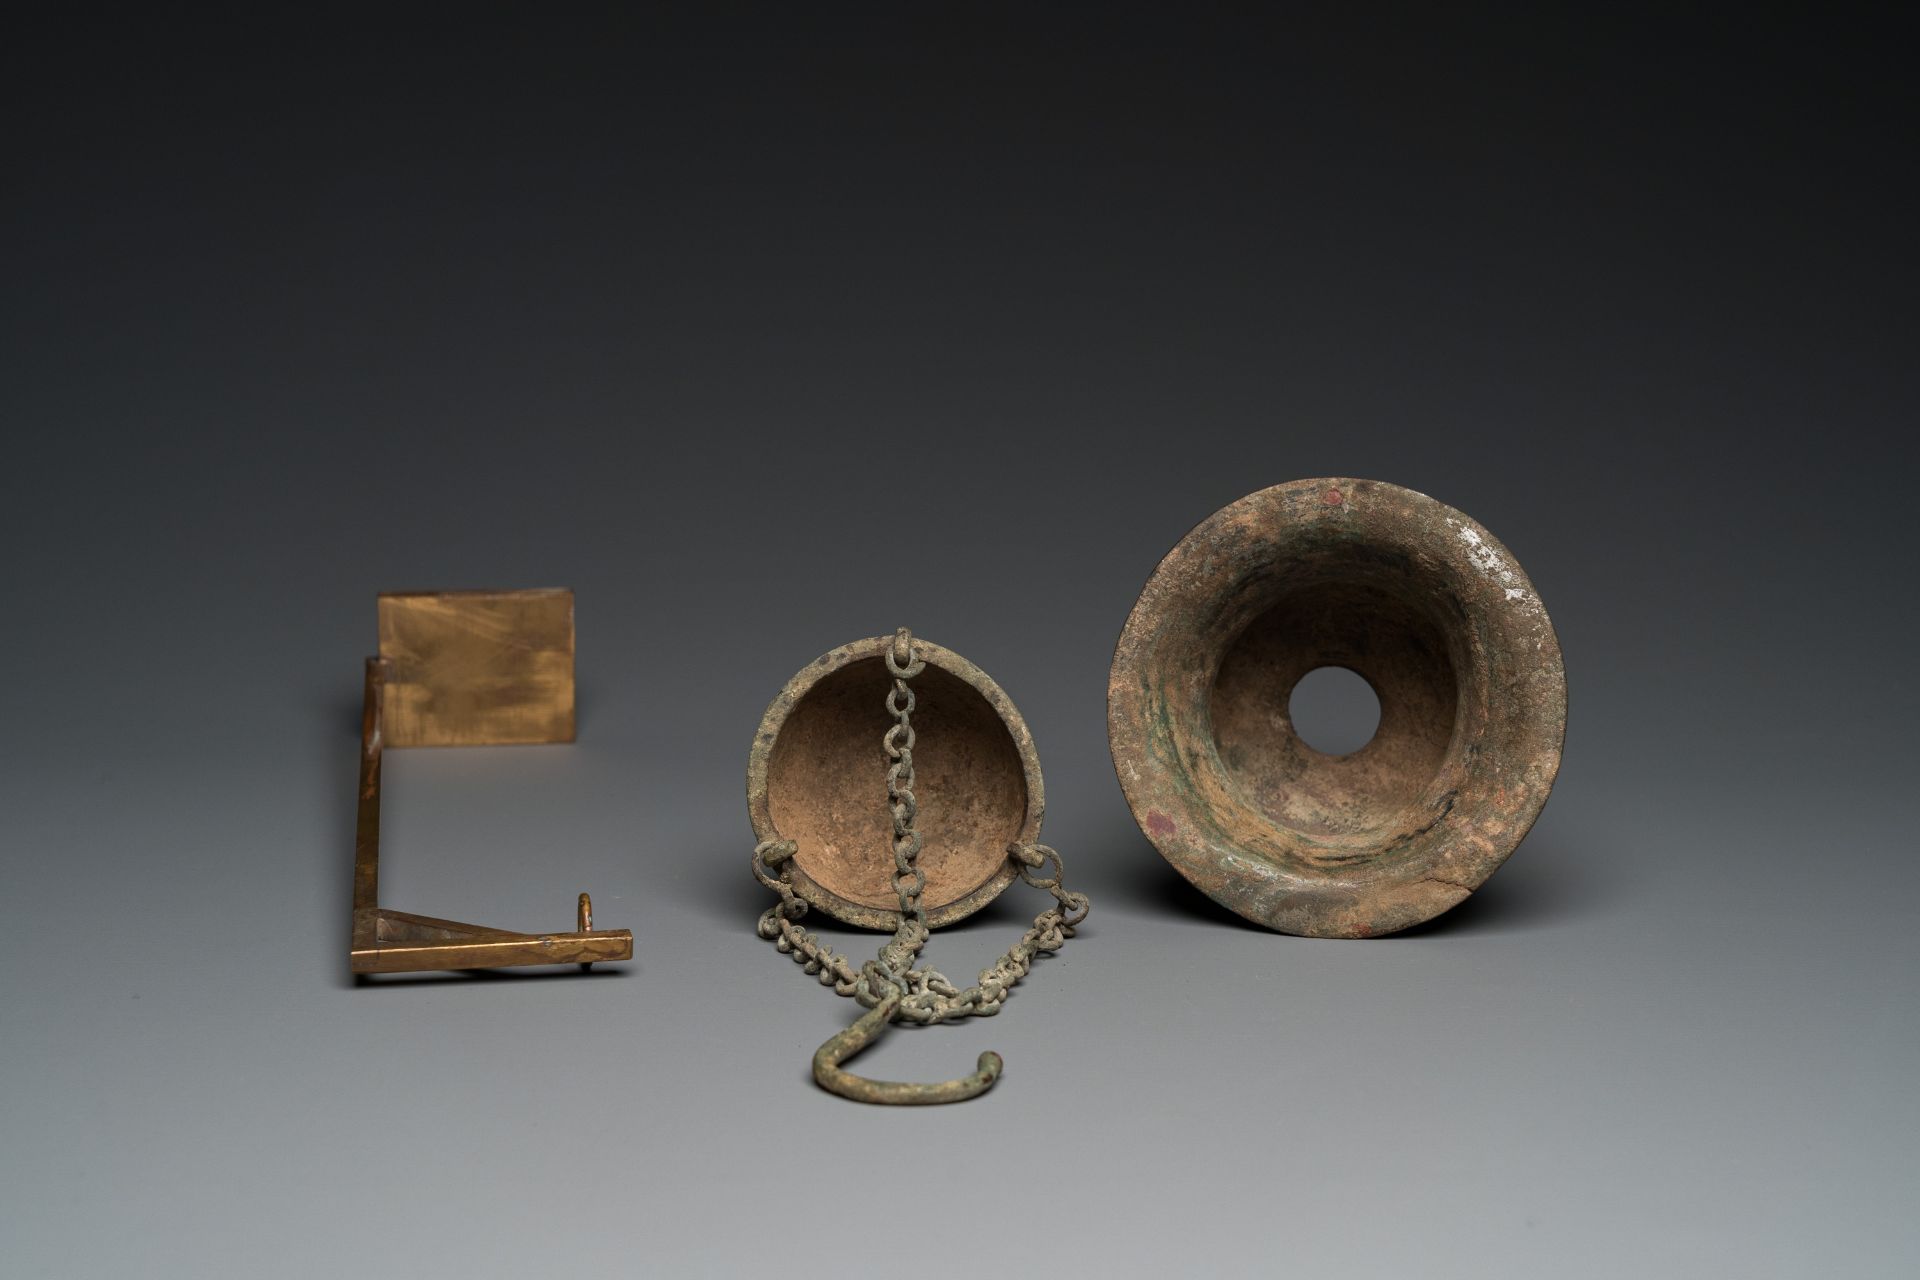 A Byzantine or Roman bronze vase and a hanging incense burner, 5/7th C. - Image 8 of 9